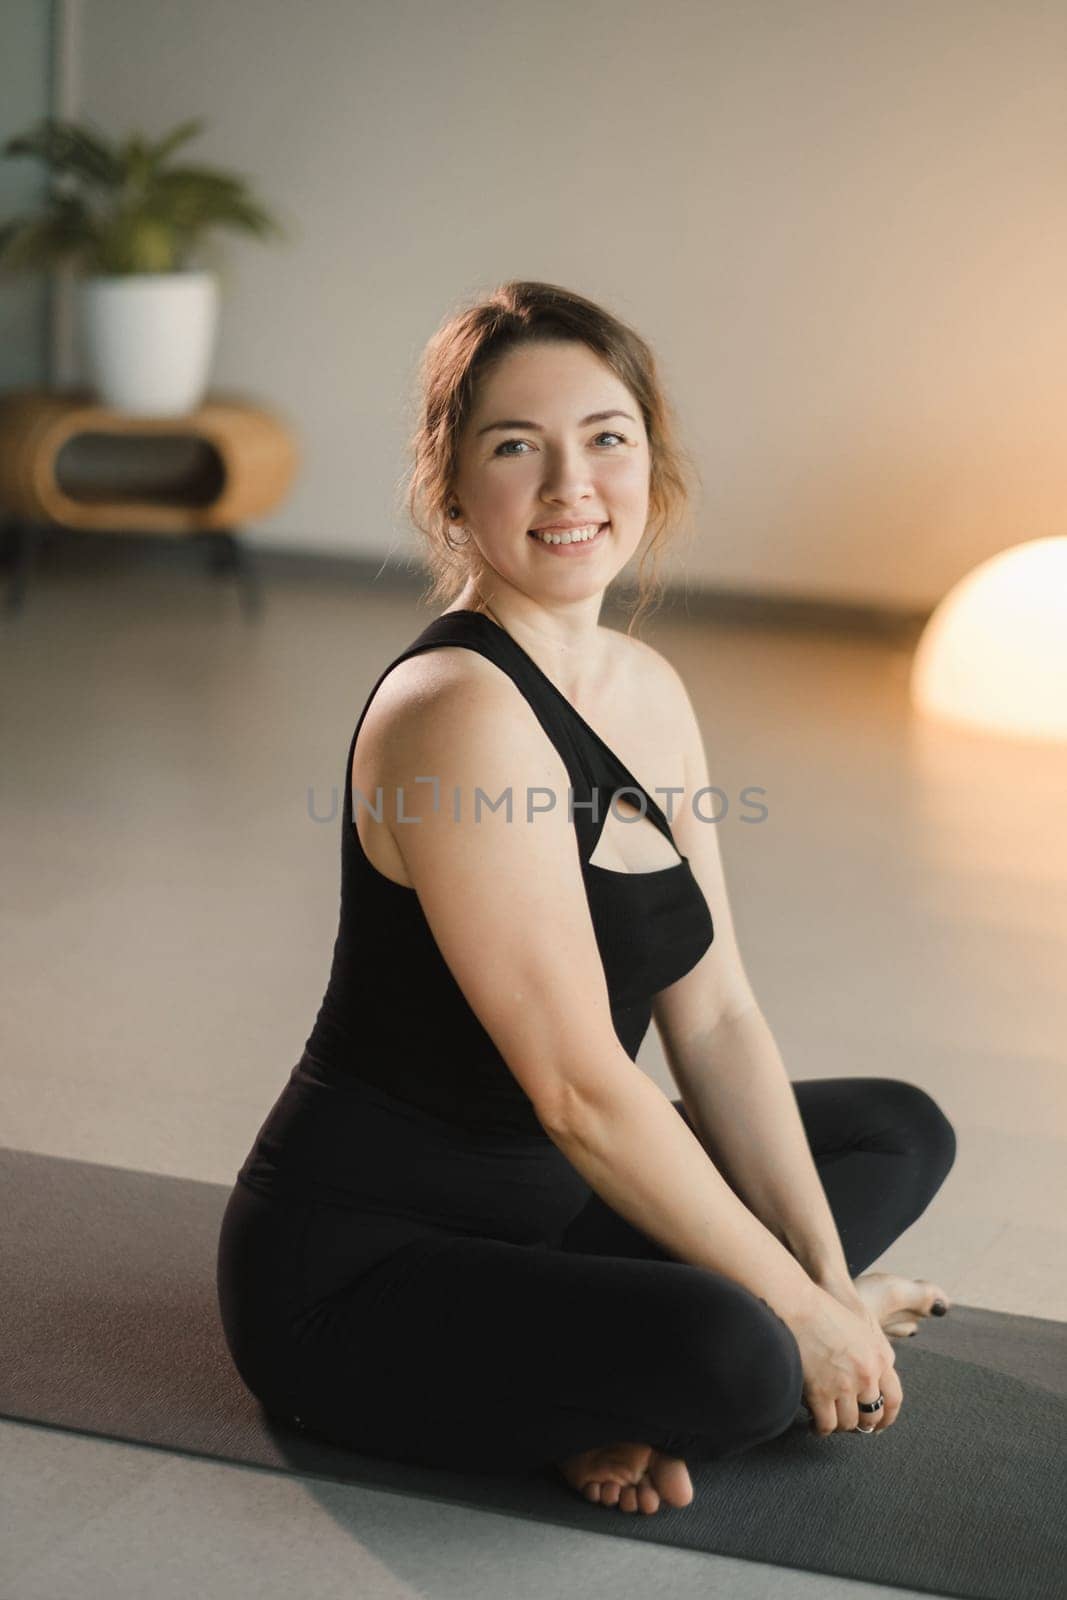 A girl in black sportswear is sitting on a yoga mat and smiling.